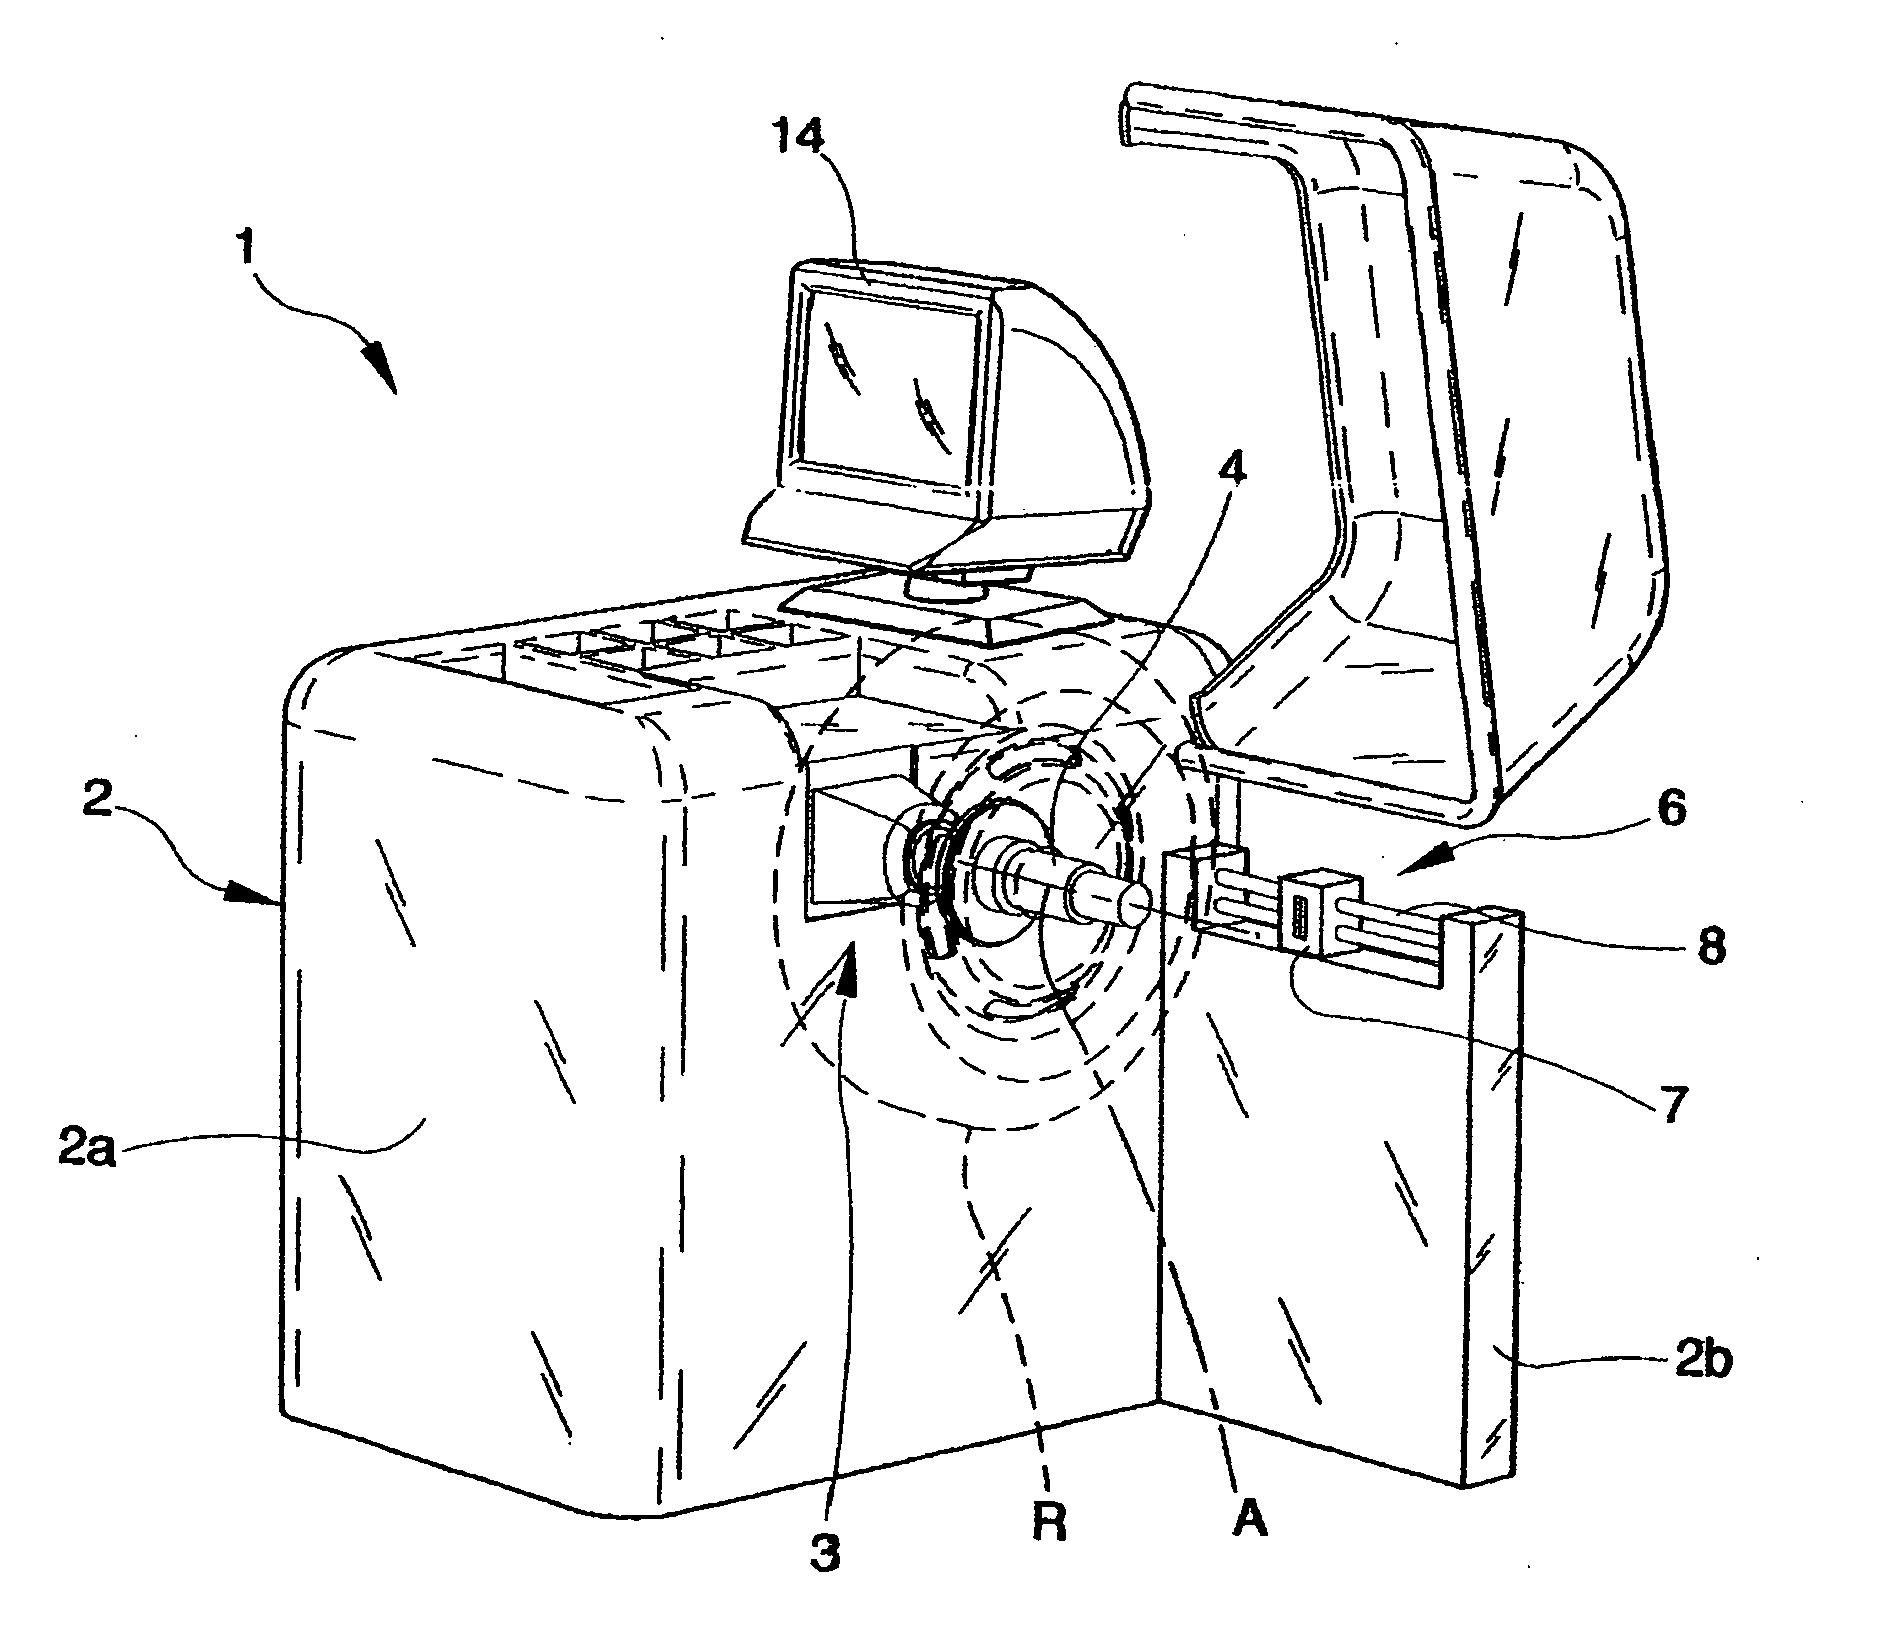 Balancing machine for vehicle wheels with analog to digital conversion and adjustable sampling frequency